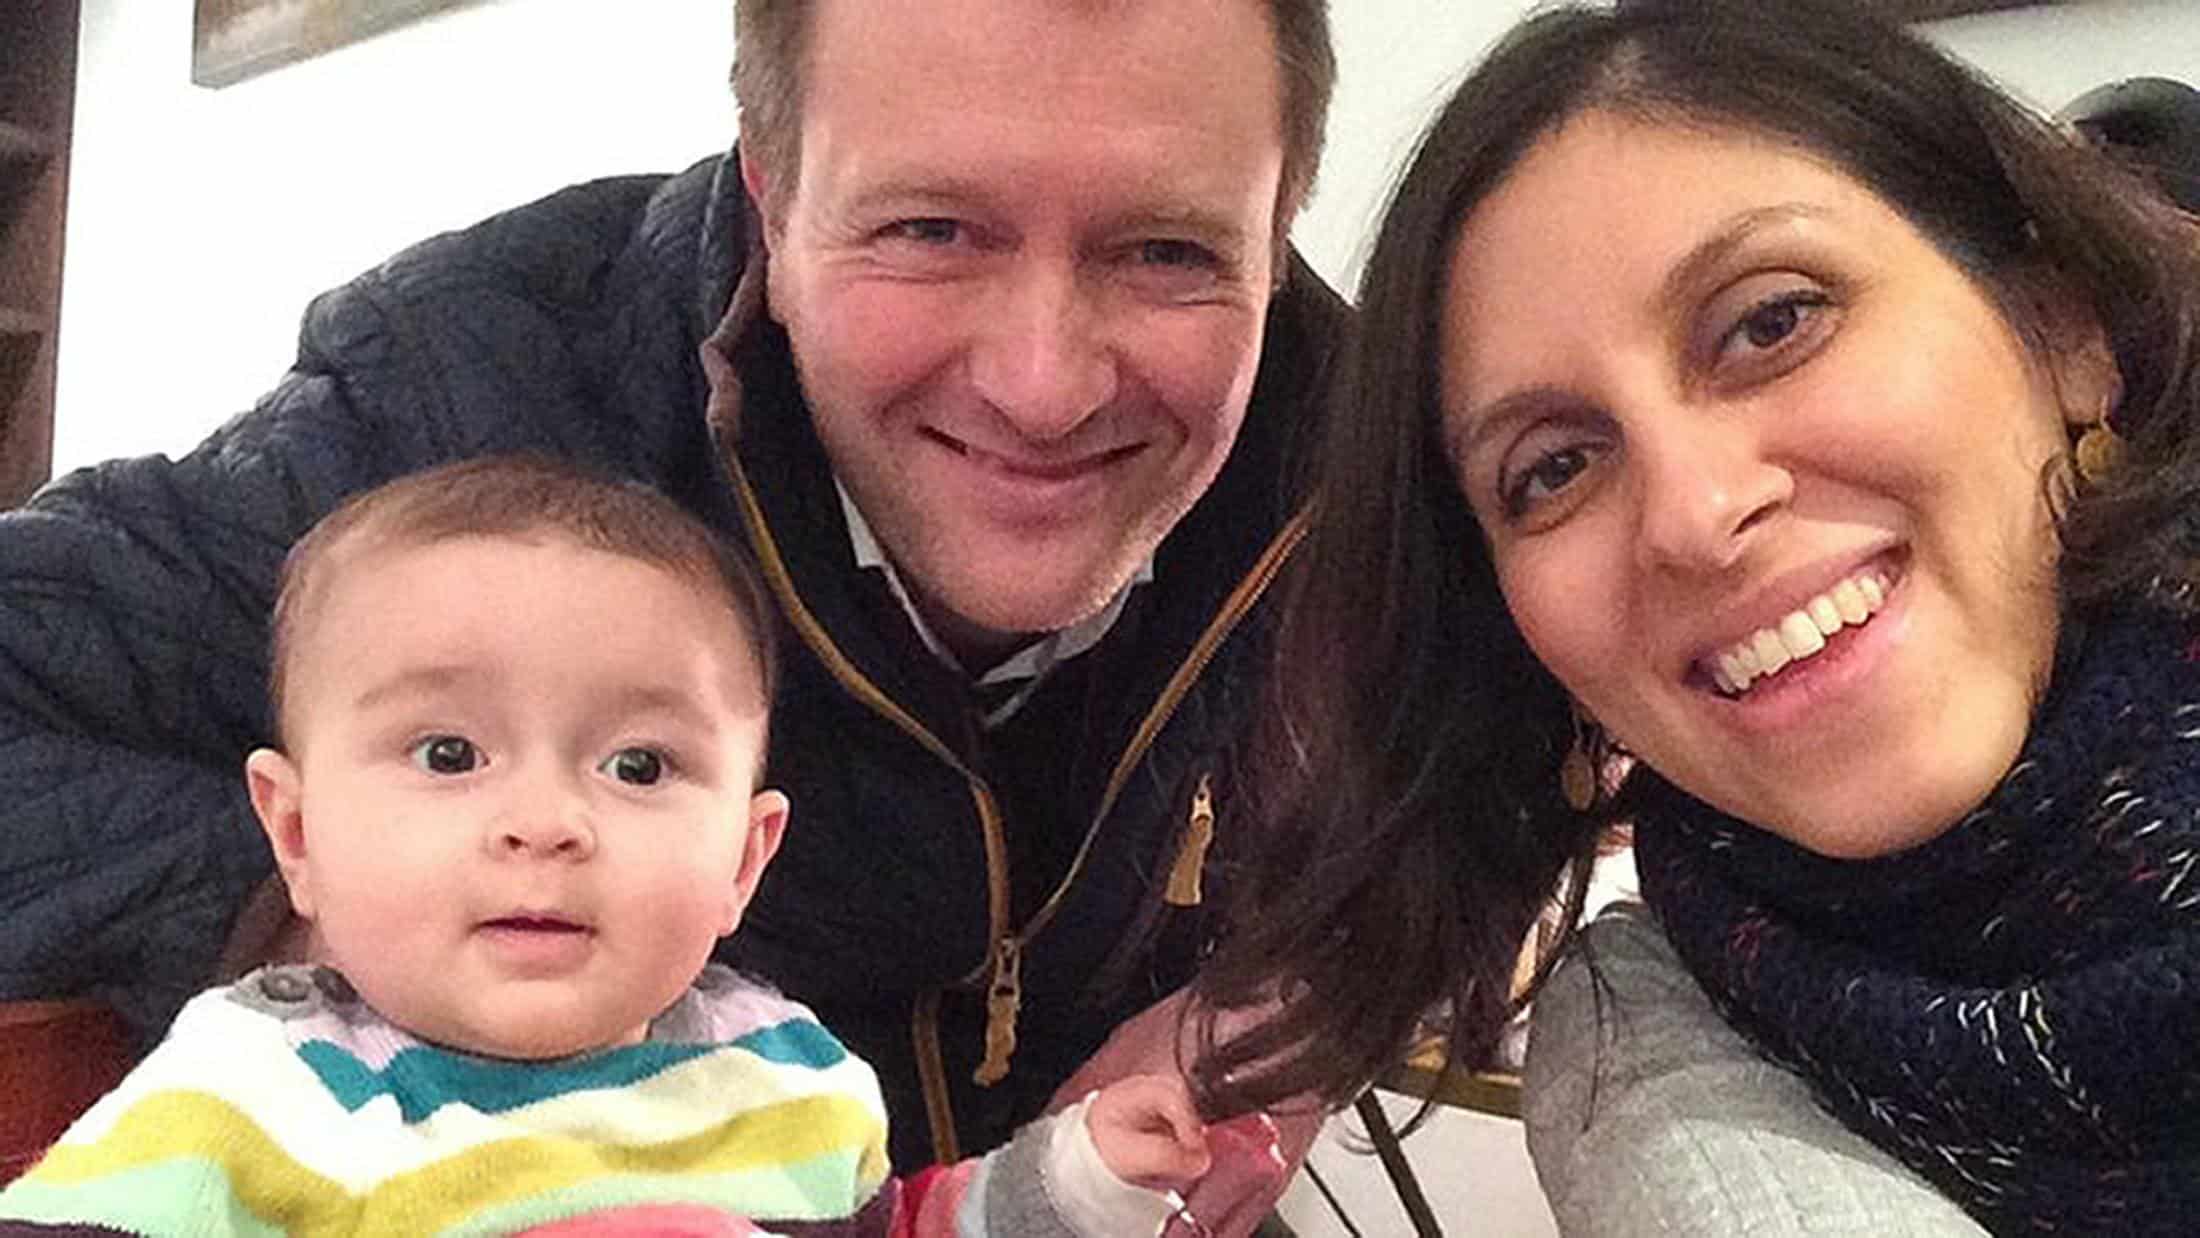 Zaghari-Ratcliffe details prison hardships in Iran including threats concerning daughter